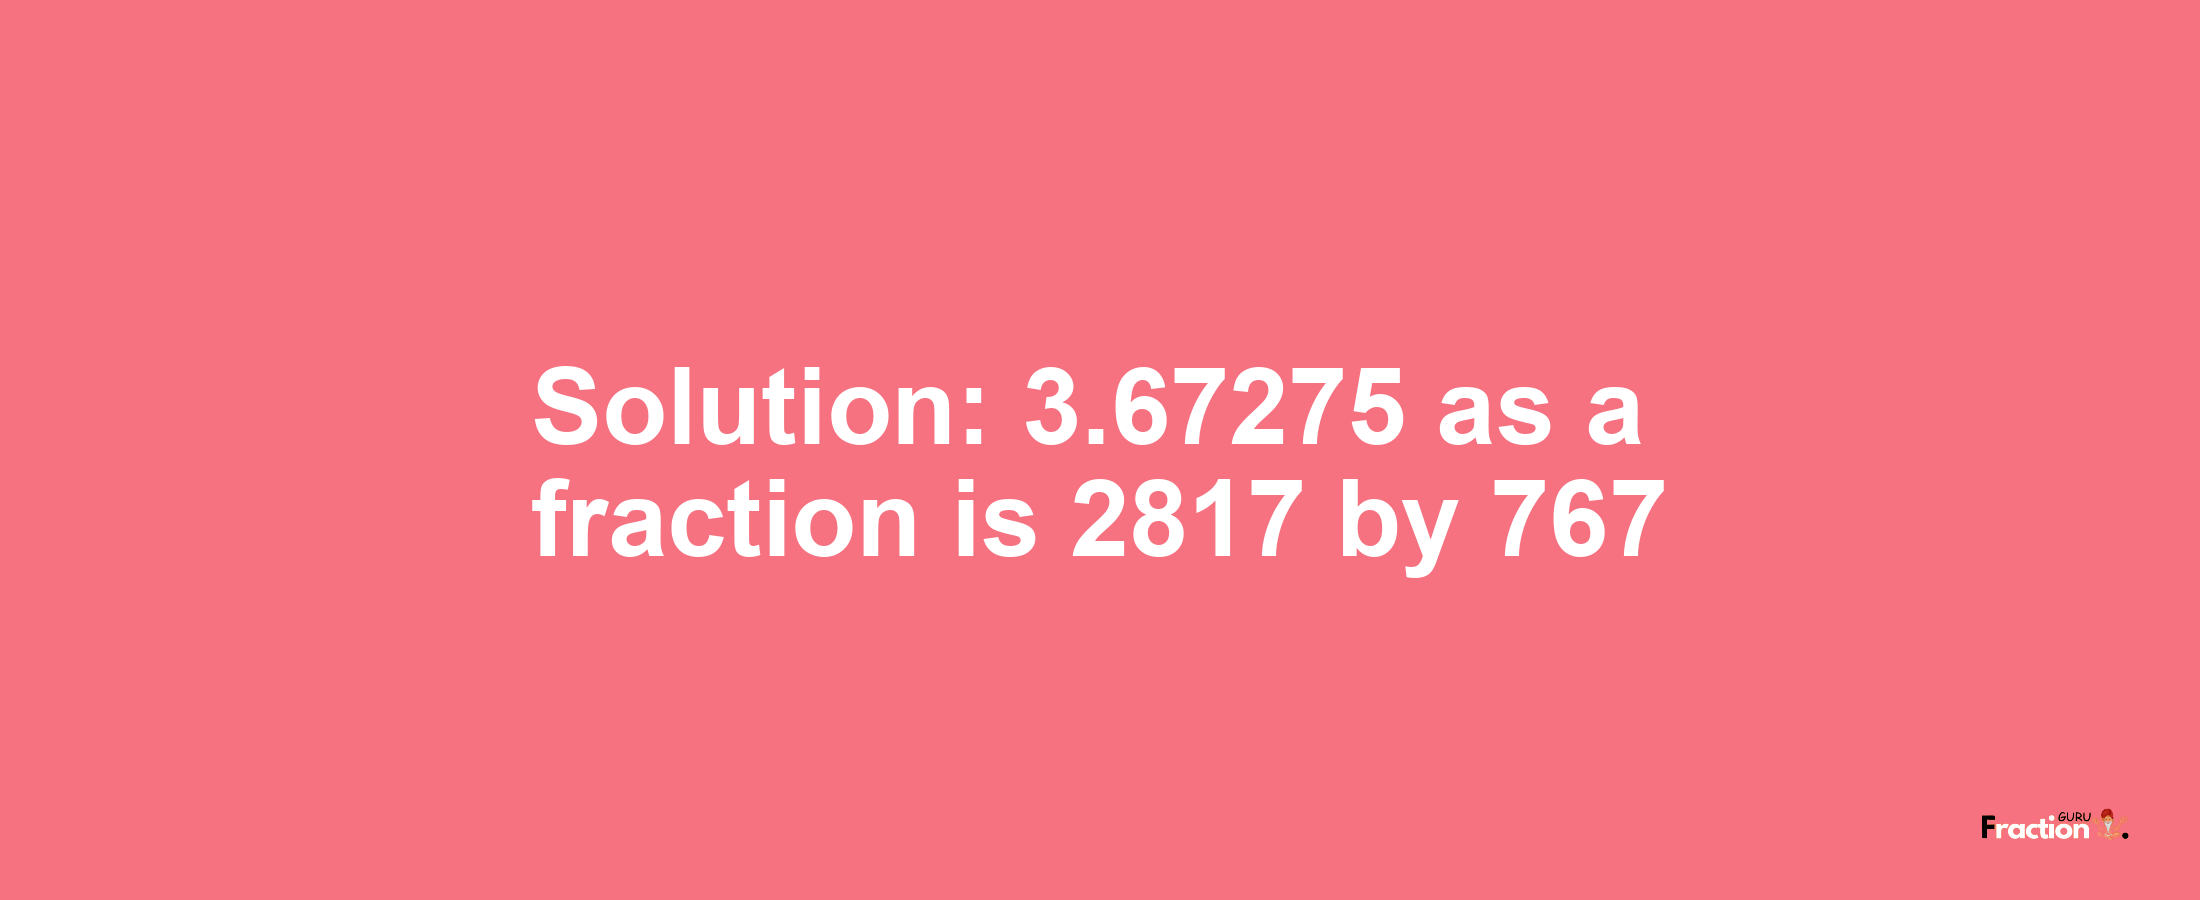 Solution:3.67275 as a fraction is 2817/767